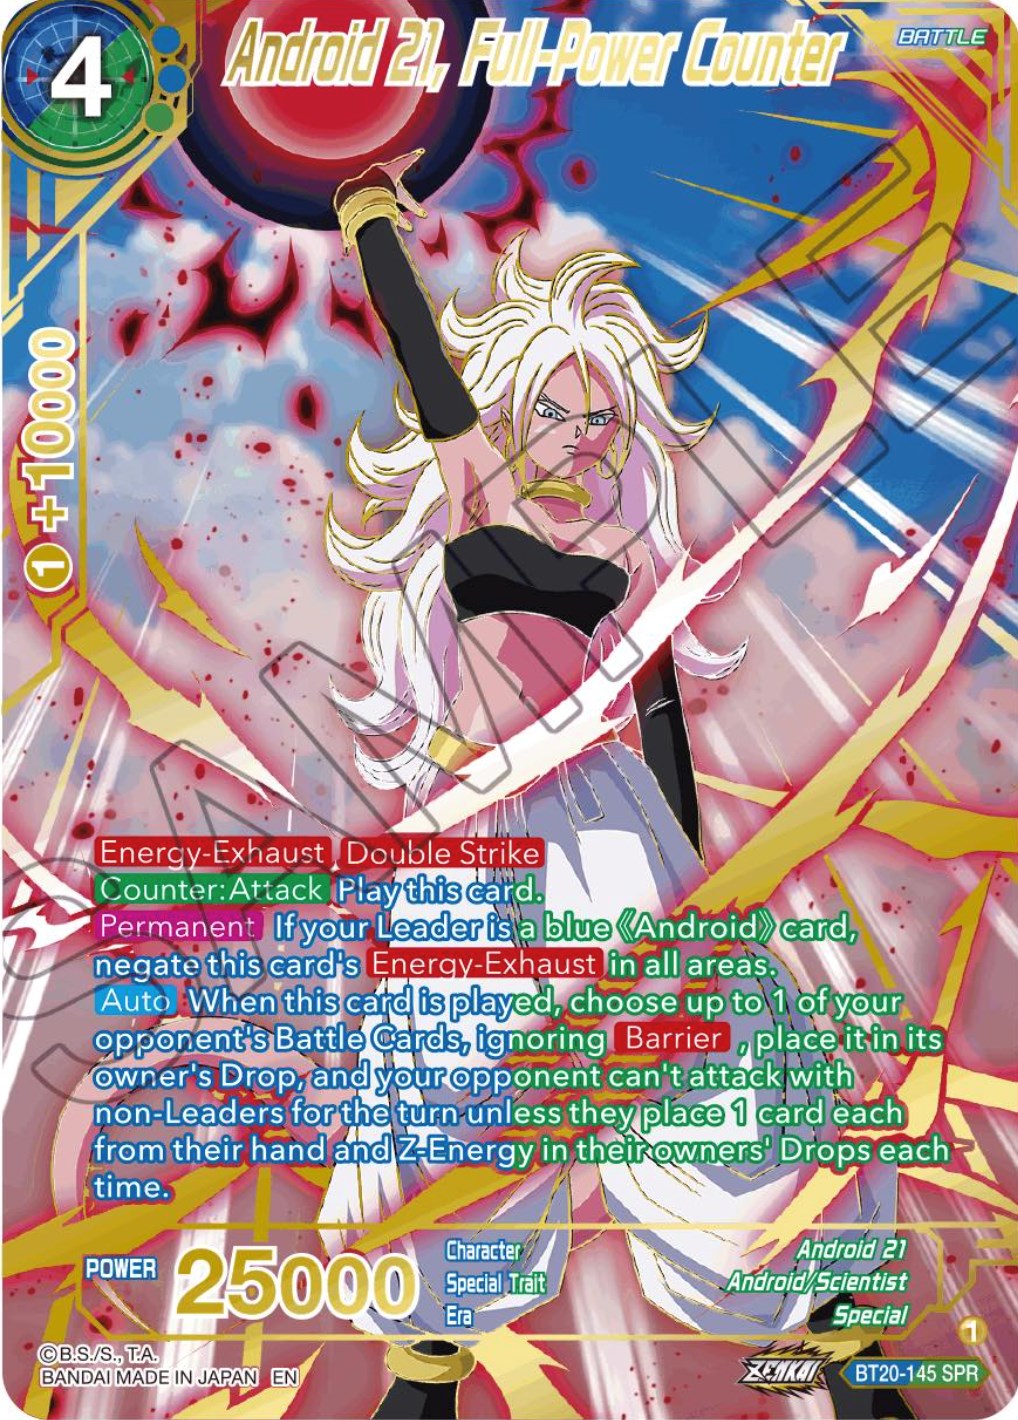 Android 21, Full-Power Counter (SPR) (BT20-145) [Power Absorbed] | North Valley Games